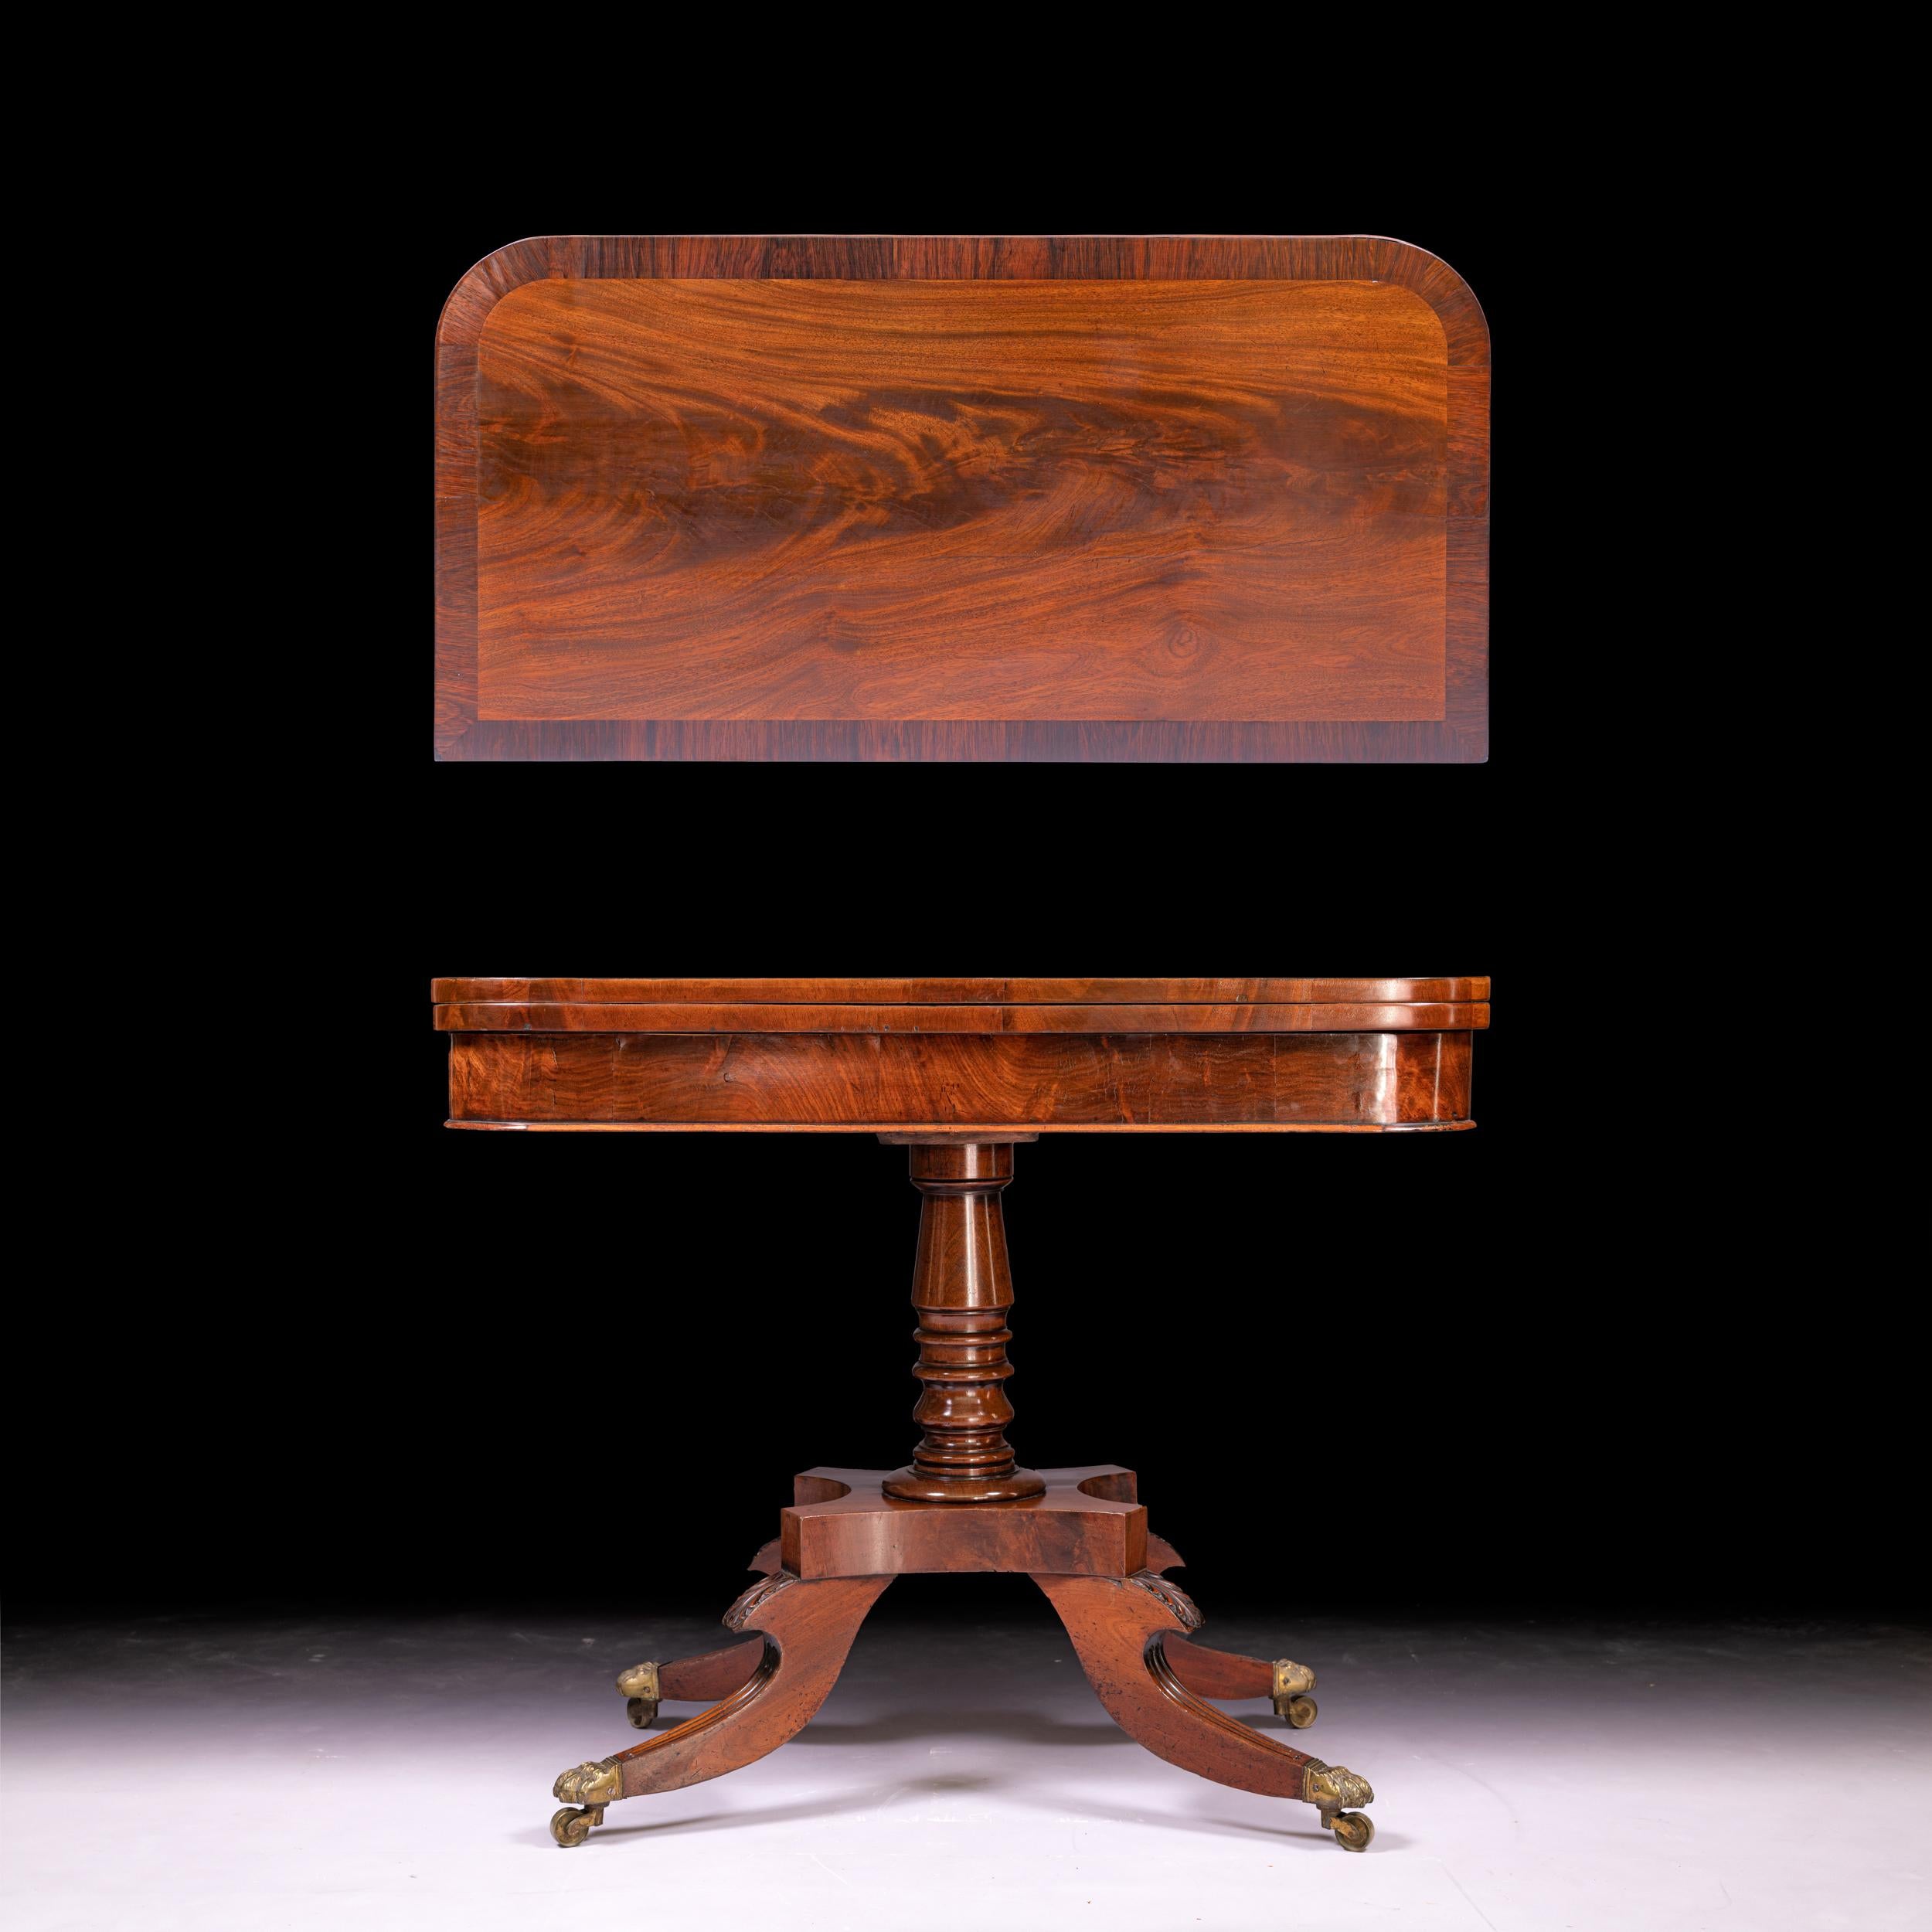 A pair of Irish Regency mahogany card tables, the rectangular top with rounded corners and a swivel-hinged top, enclosing a green baize inset playing surface, each frieze with a rectangular panel, raised on a baluster column, terminating on outswept